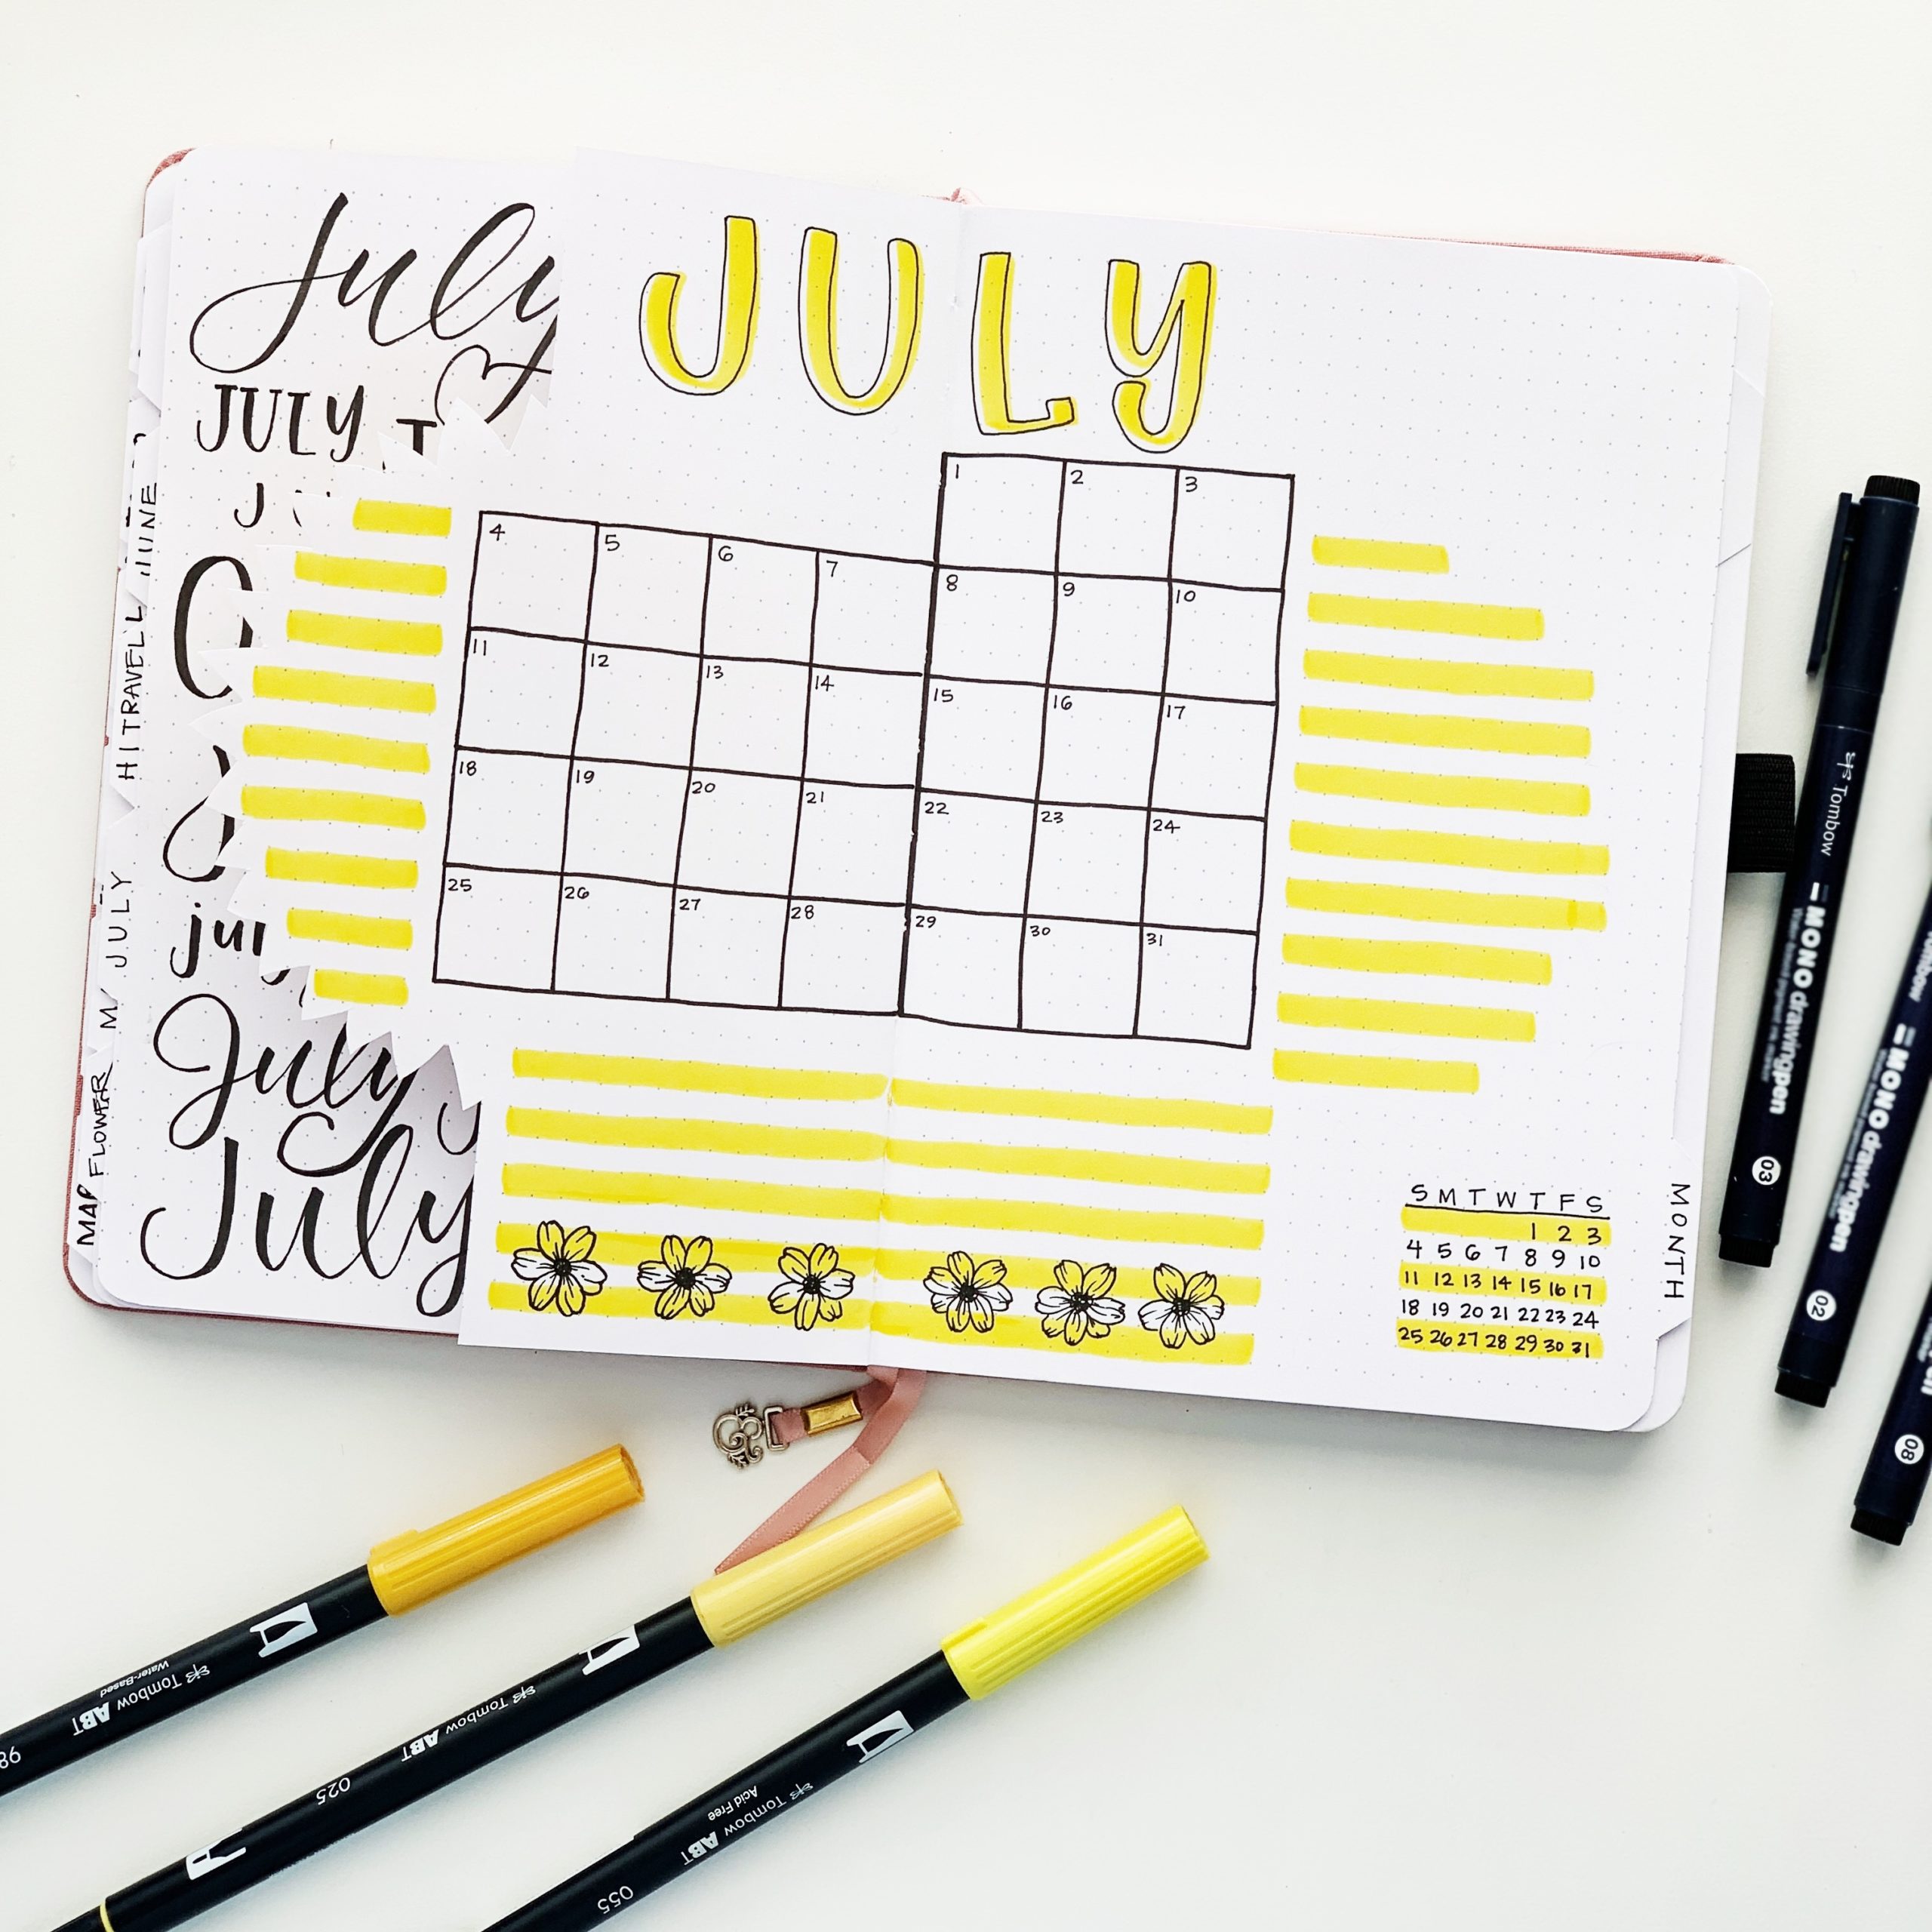 5 Quick Tips to Embrace Your New Bullet Journal, by Wally El-Hitamy